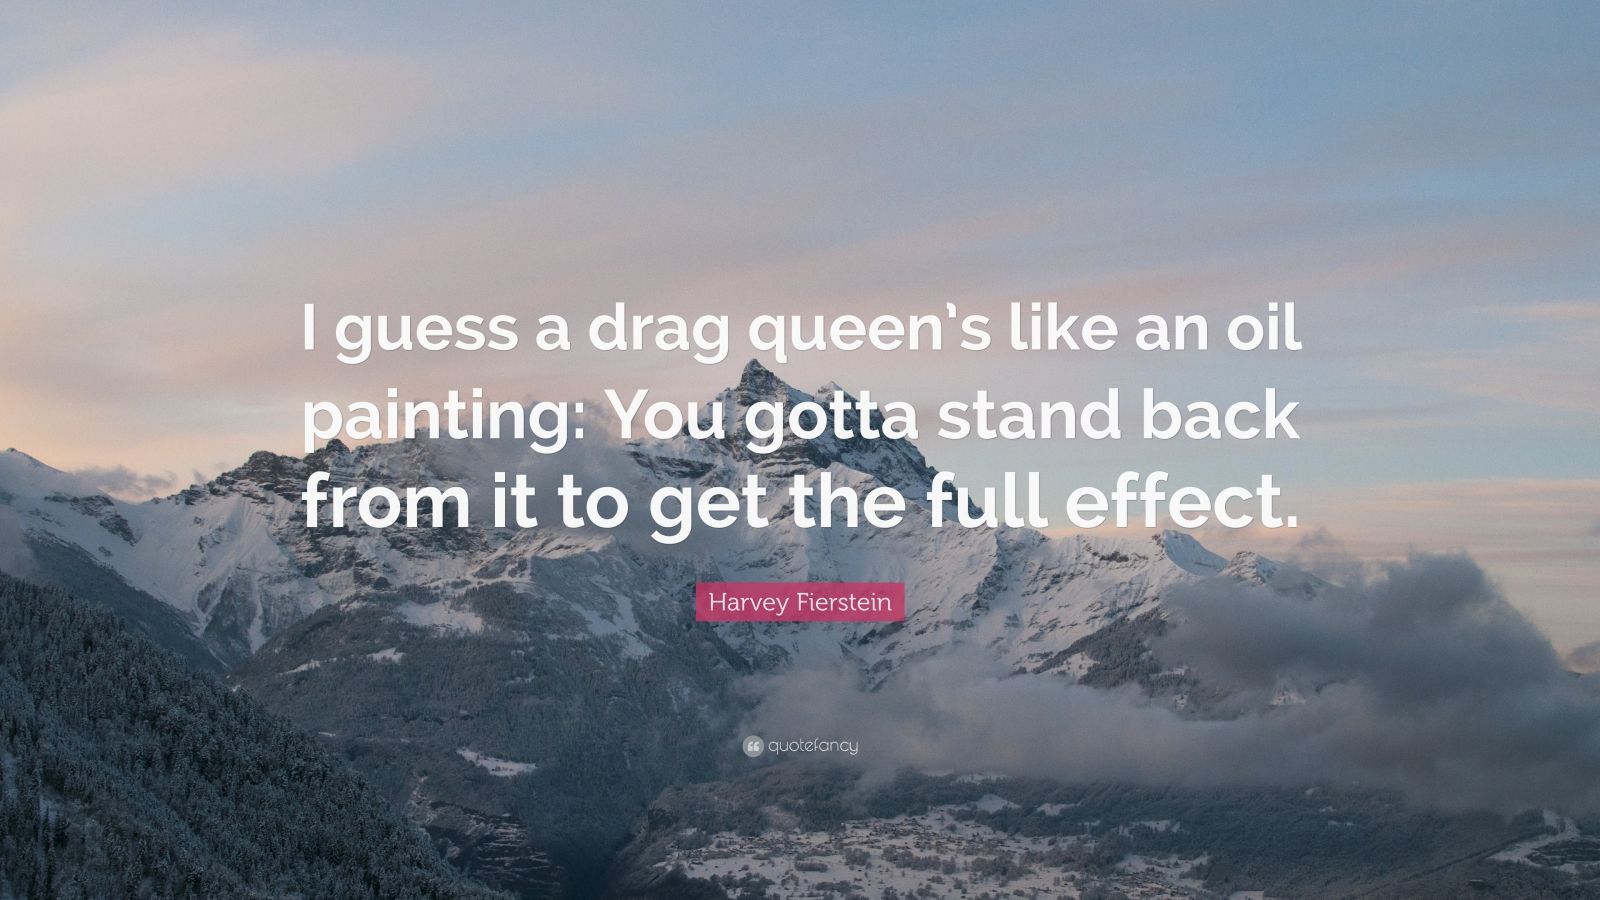 4336882 Harvey Fierstein Quote I guess a drag queen s like an oil painting